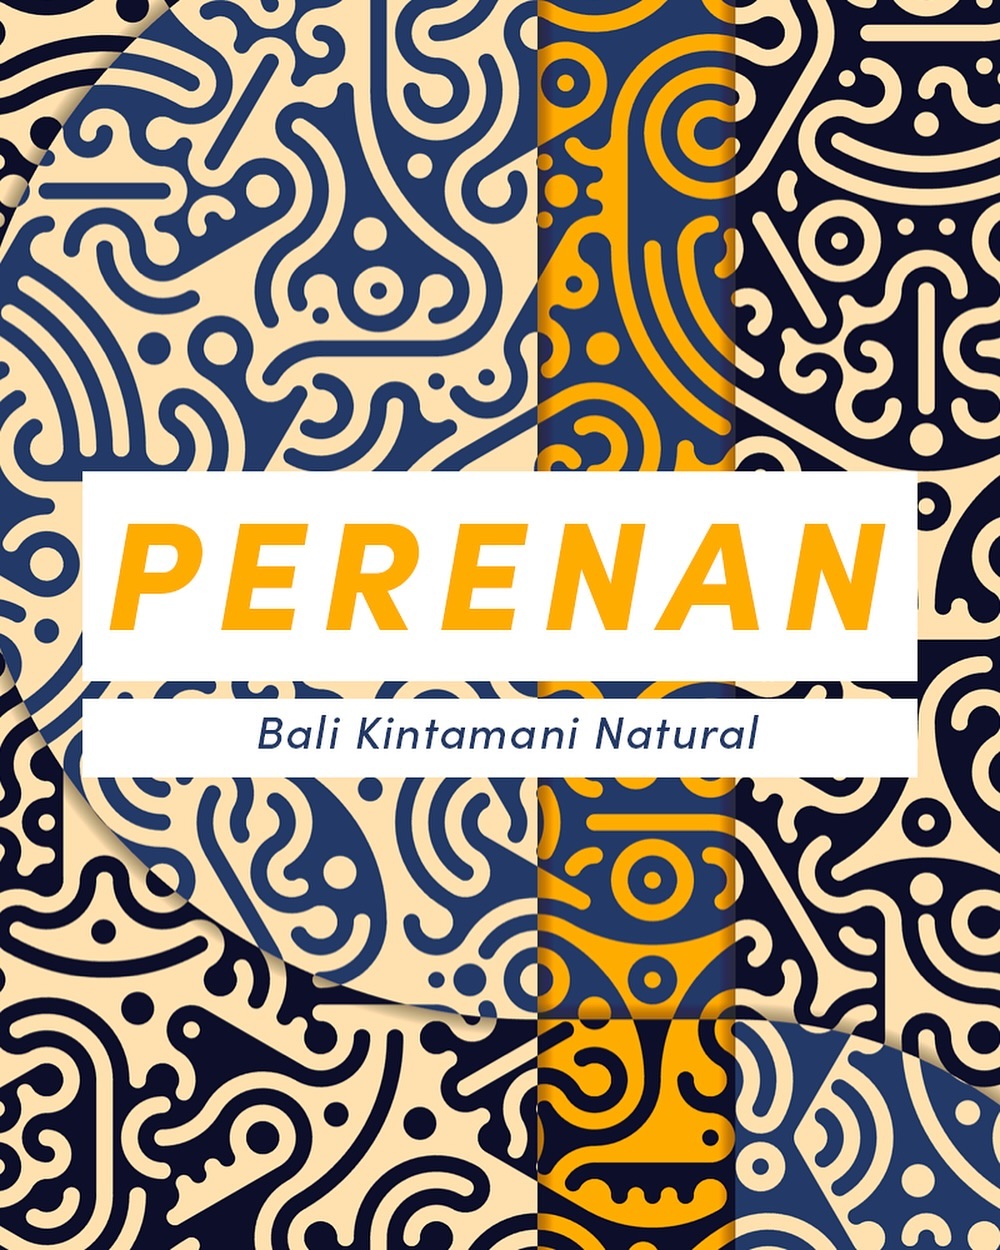 We apologise for the delay! ‘Perenan’ is now live and can be ordered via the link in our bio. Fun fact: The name of this